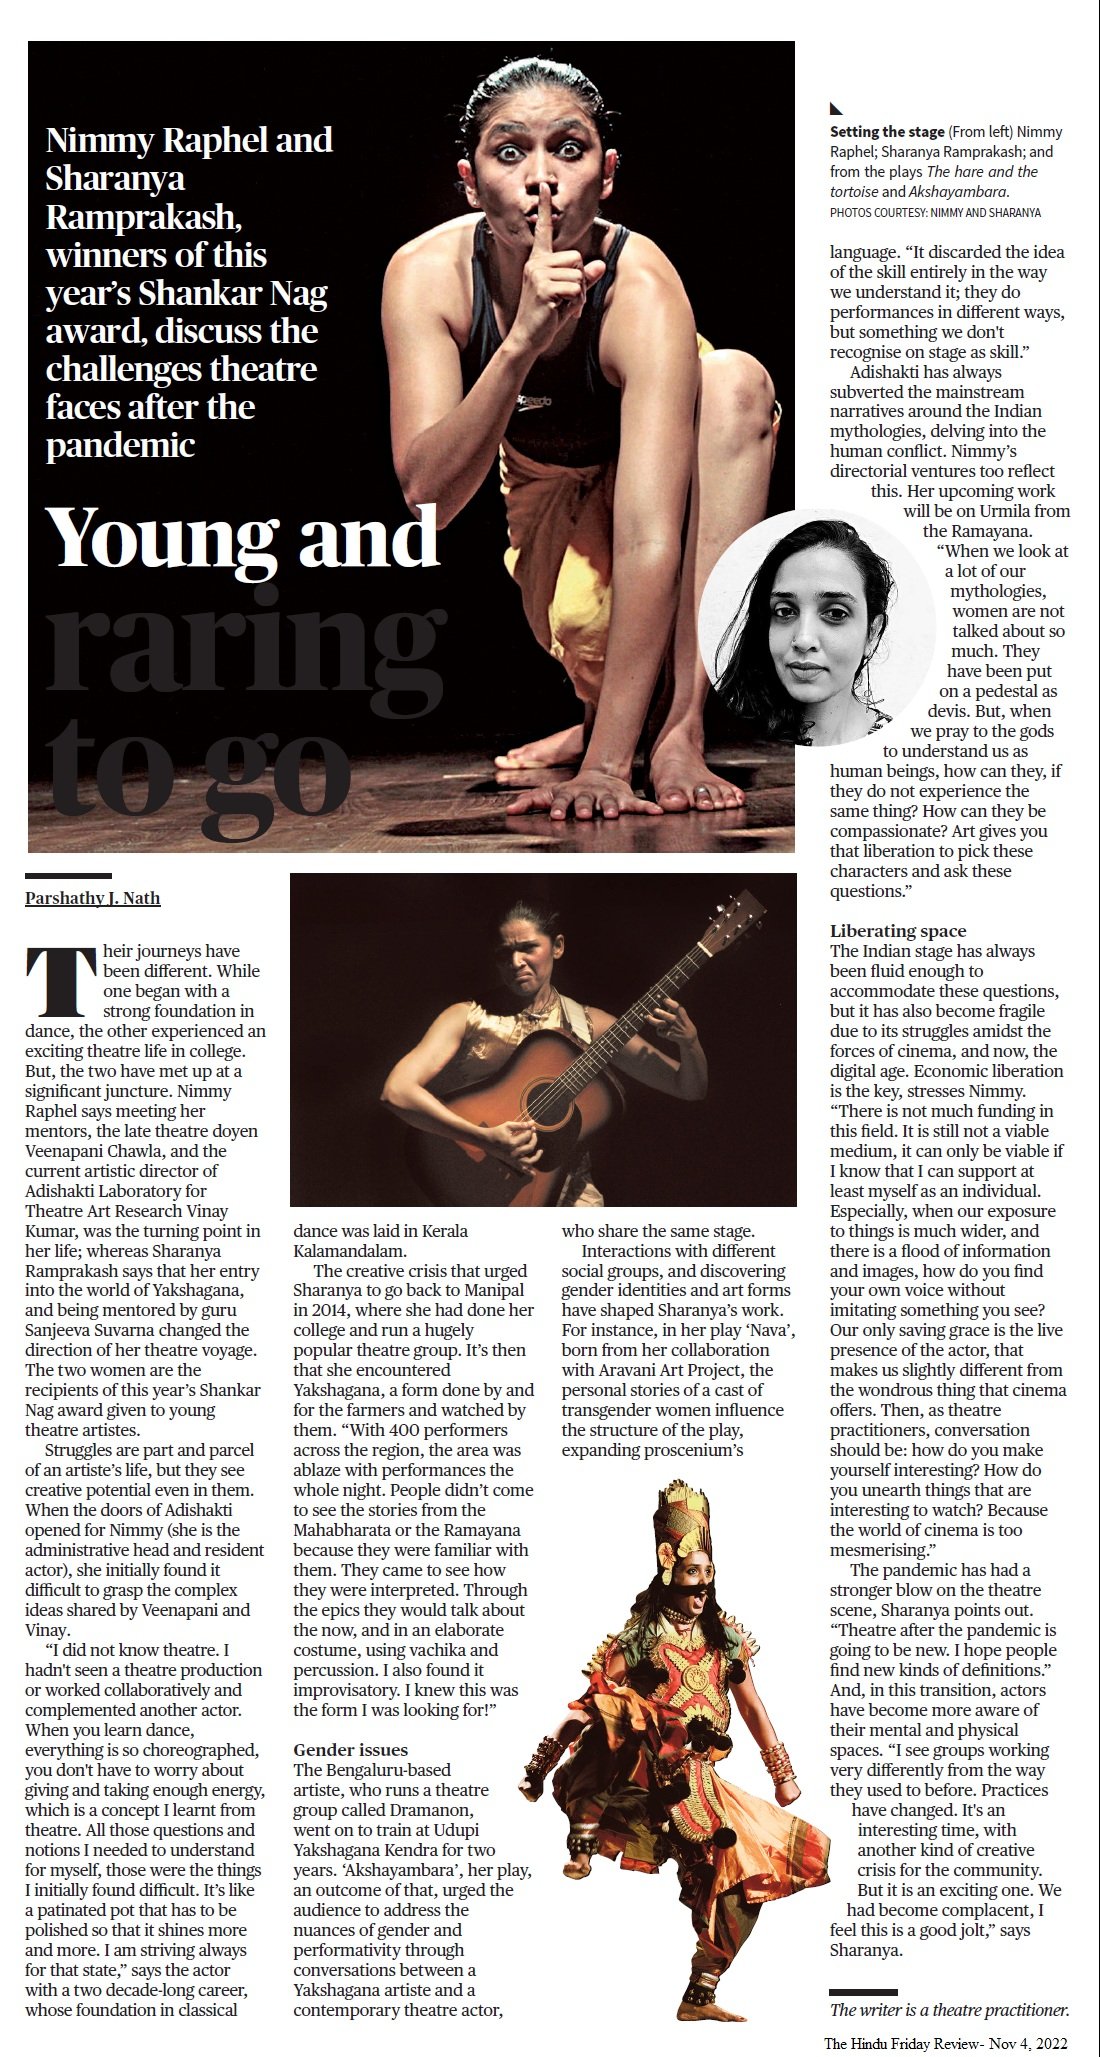 Young and raring to go - Parshathy J Nath